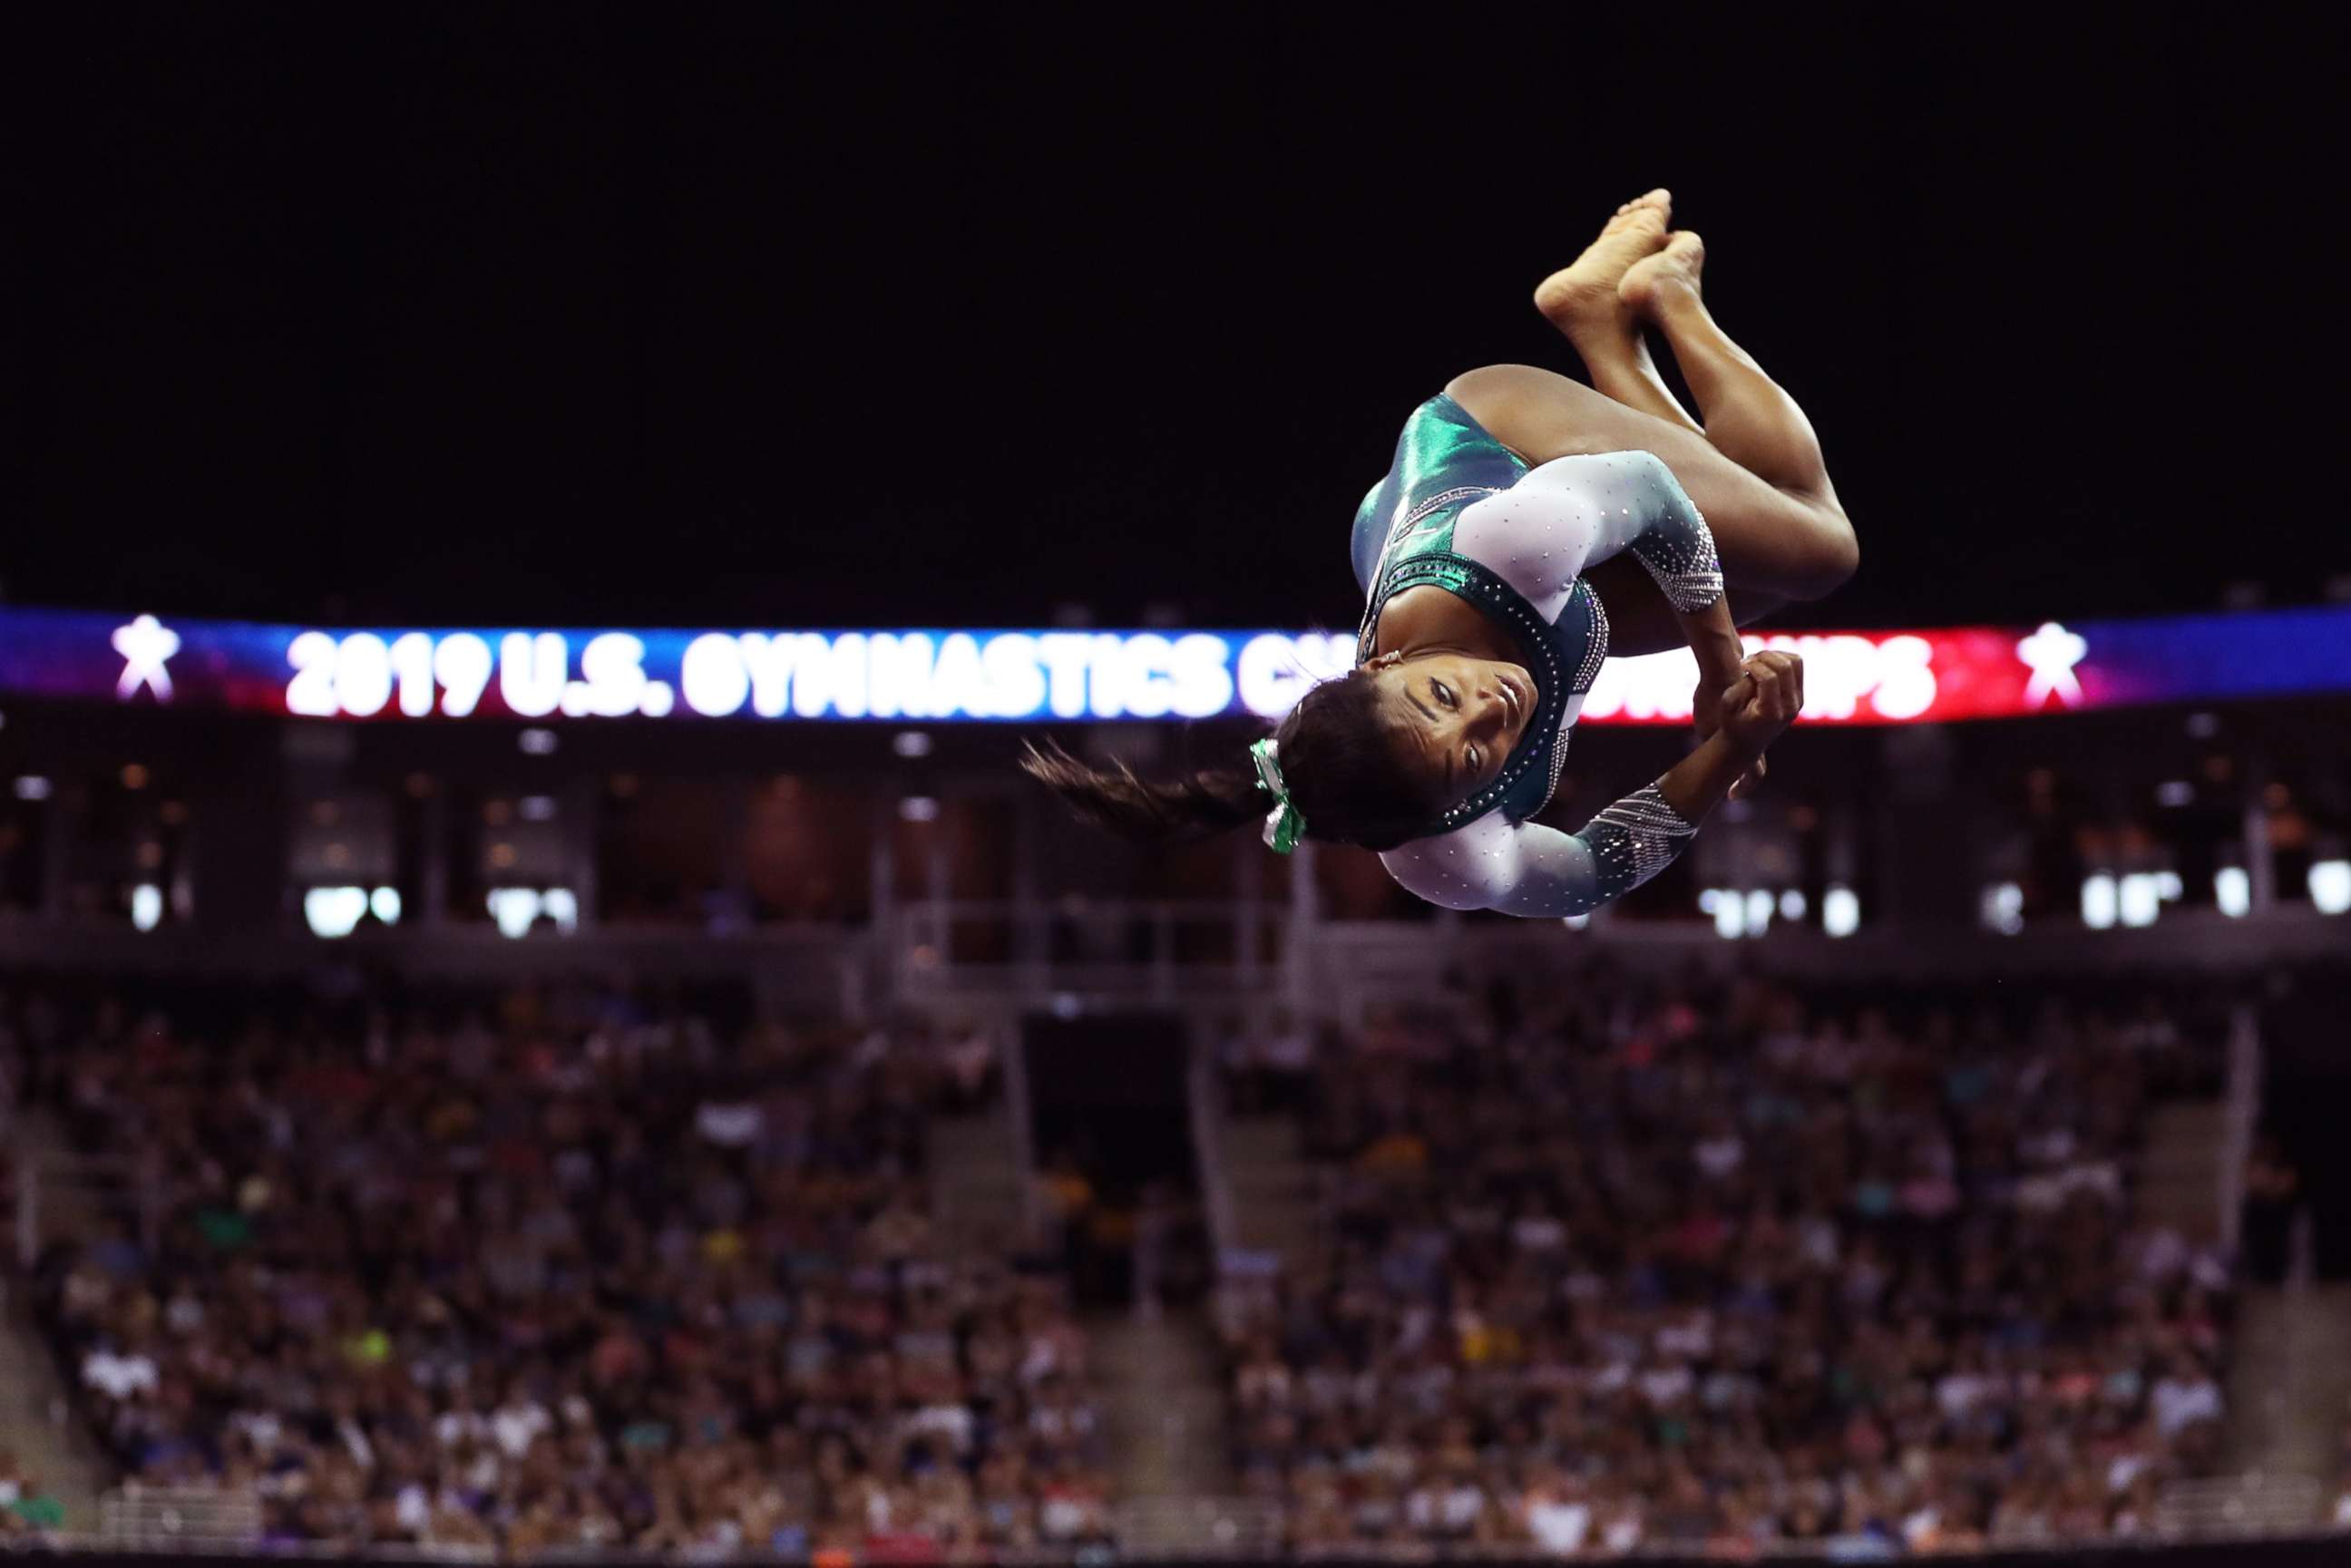 PHOTO: Gymnast Simone Biles competes during day one of the senior women's competition at the 2019 US Gymnastics Championships, held in Kansas City, MO., August 9, 2019.